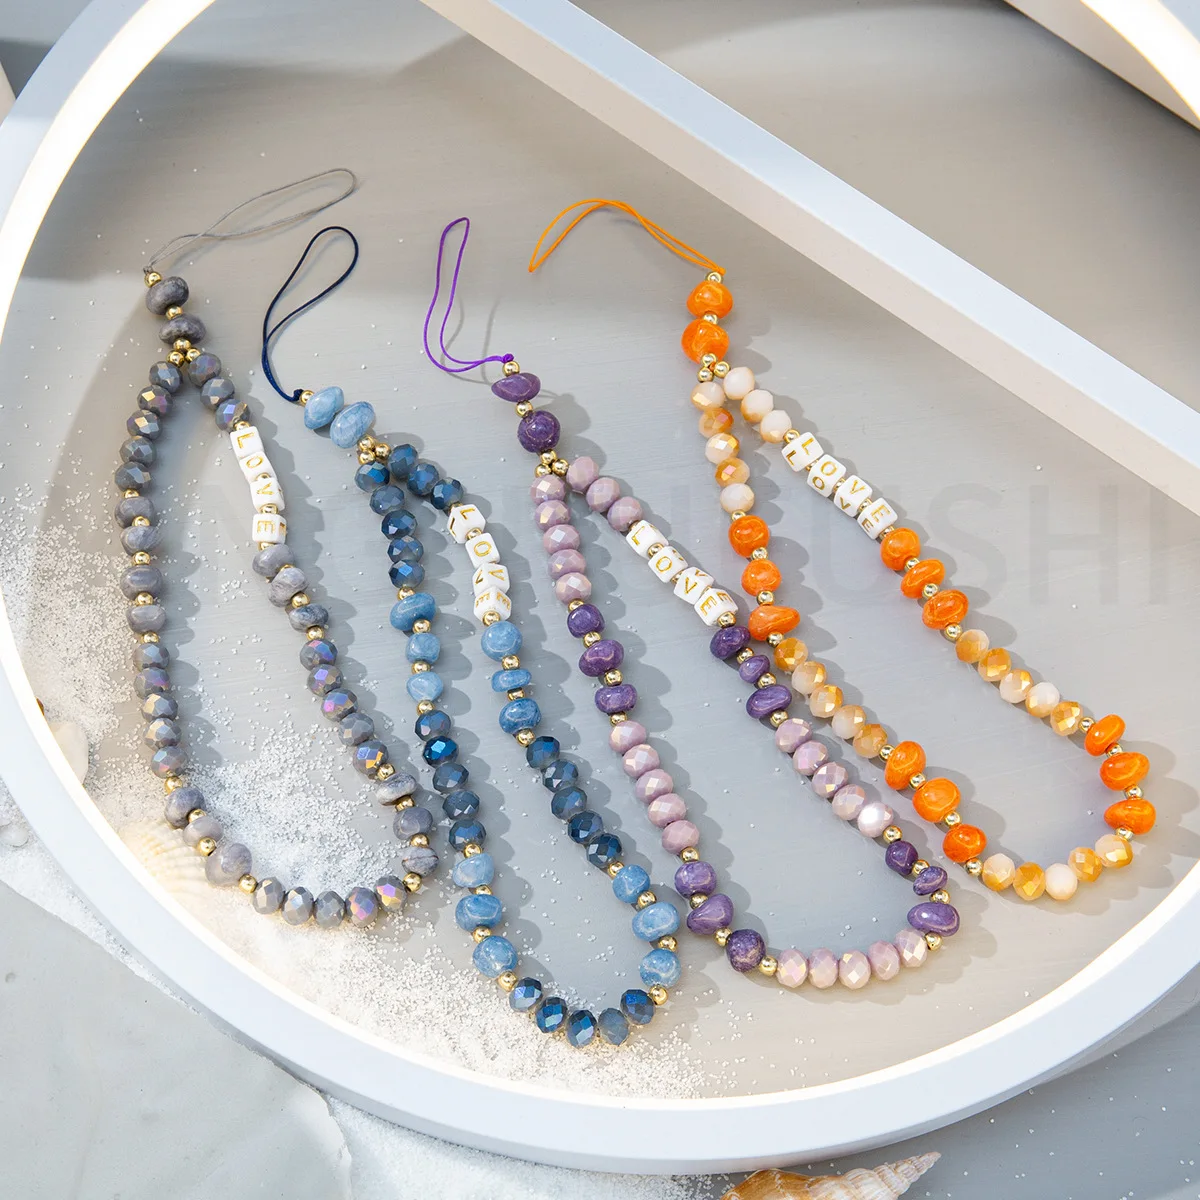 

10pcs Crystal Natural Stone Beads Mobile Phone Charm Women Girls Telephone Cellphone Strap Anti-Lost Lanyard Jewelry Wholesale